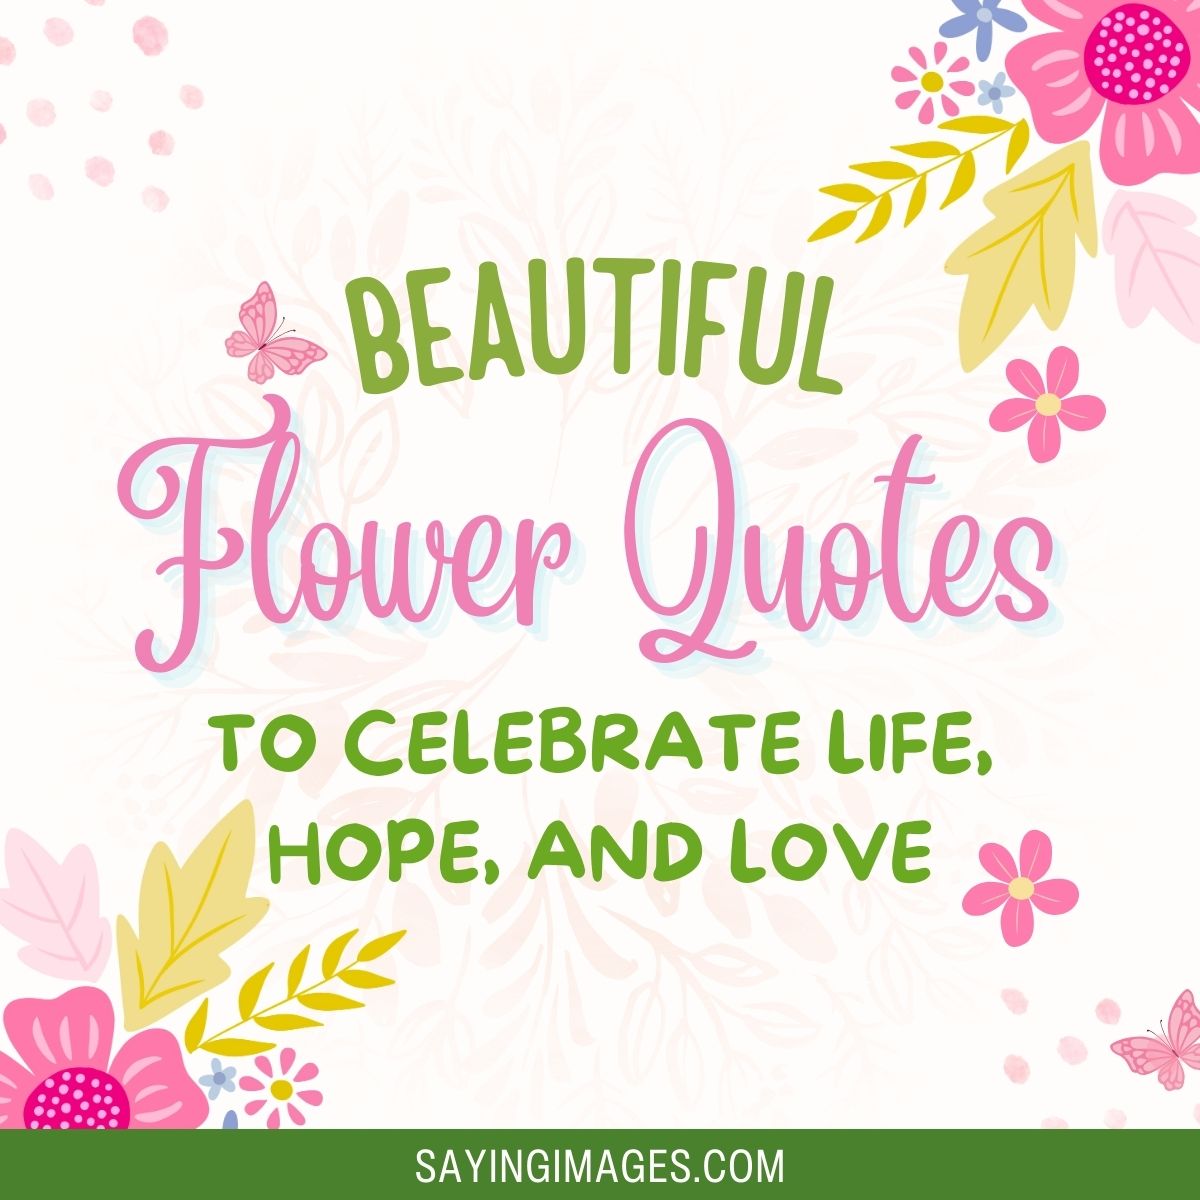 35 Beautiful Flower Quotes To Celebrate Life, Hope, And Love